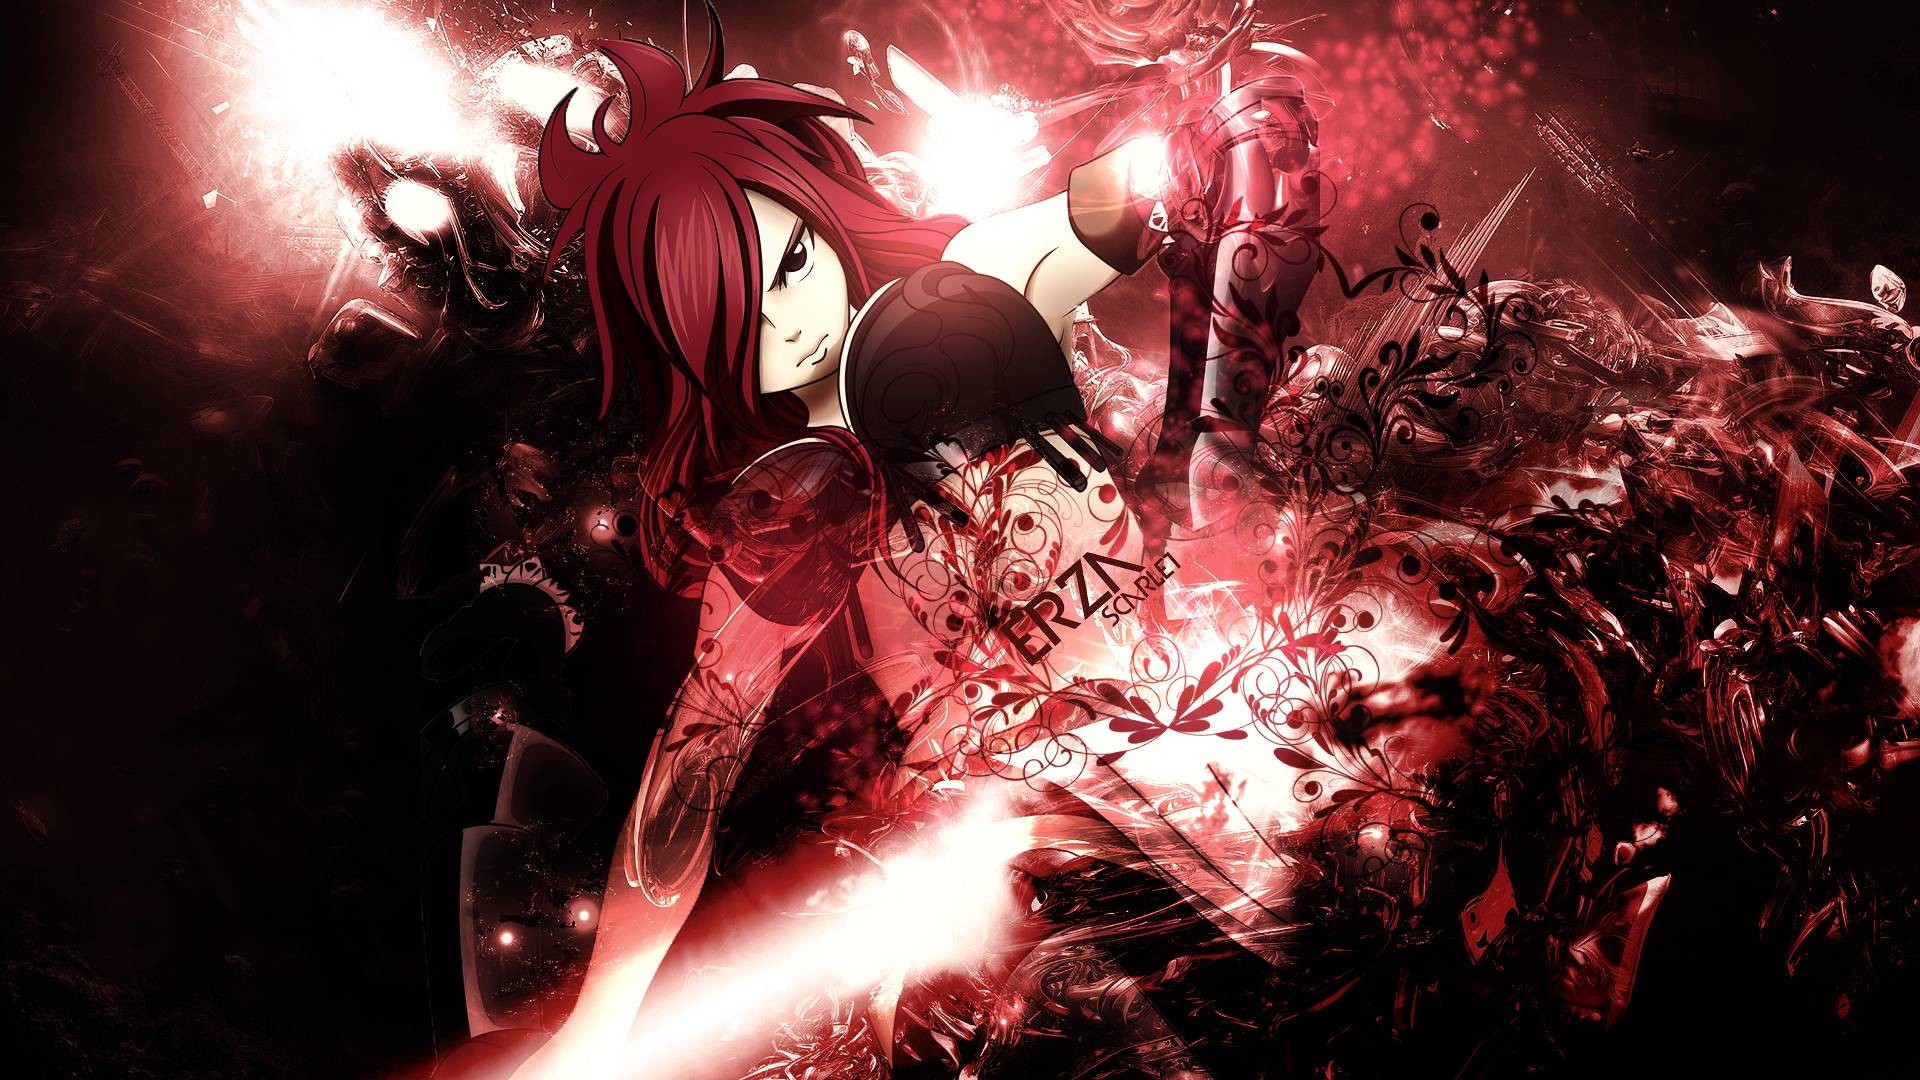 1920x1080 Fairy Tail Wallpaper Hd Erza Images & Pictures - Becuo